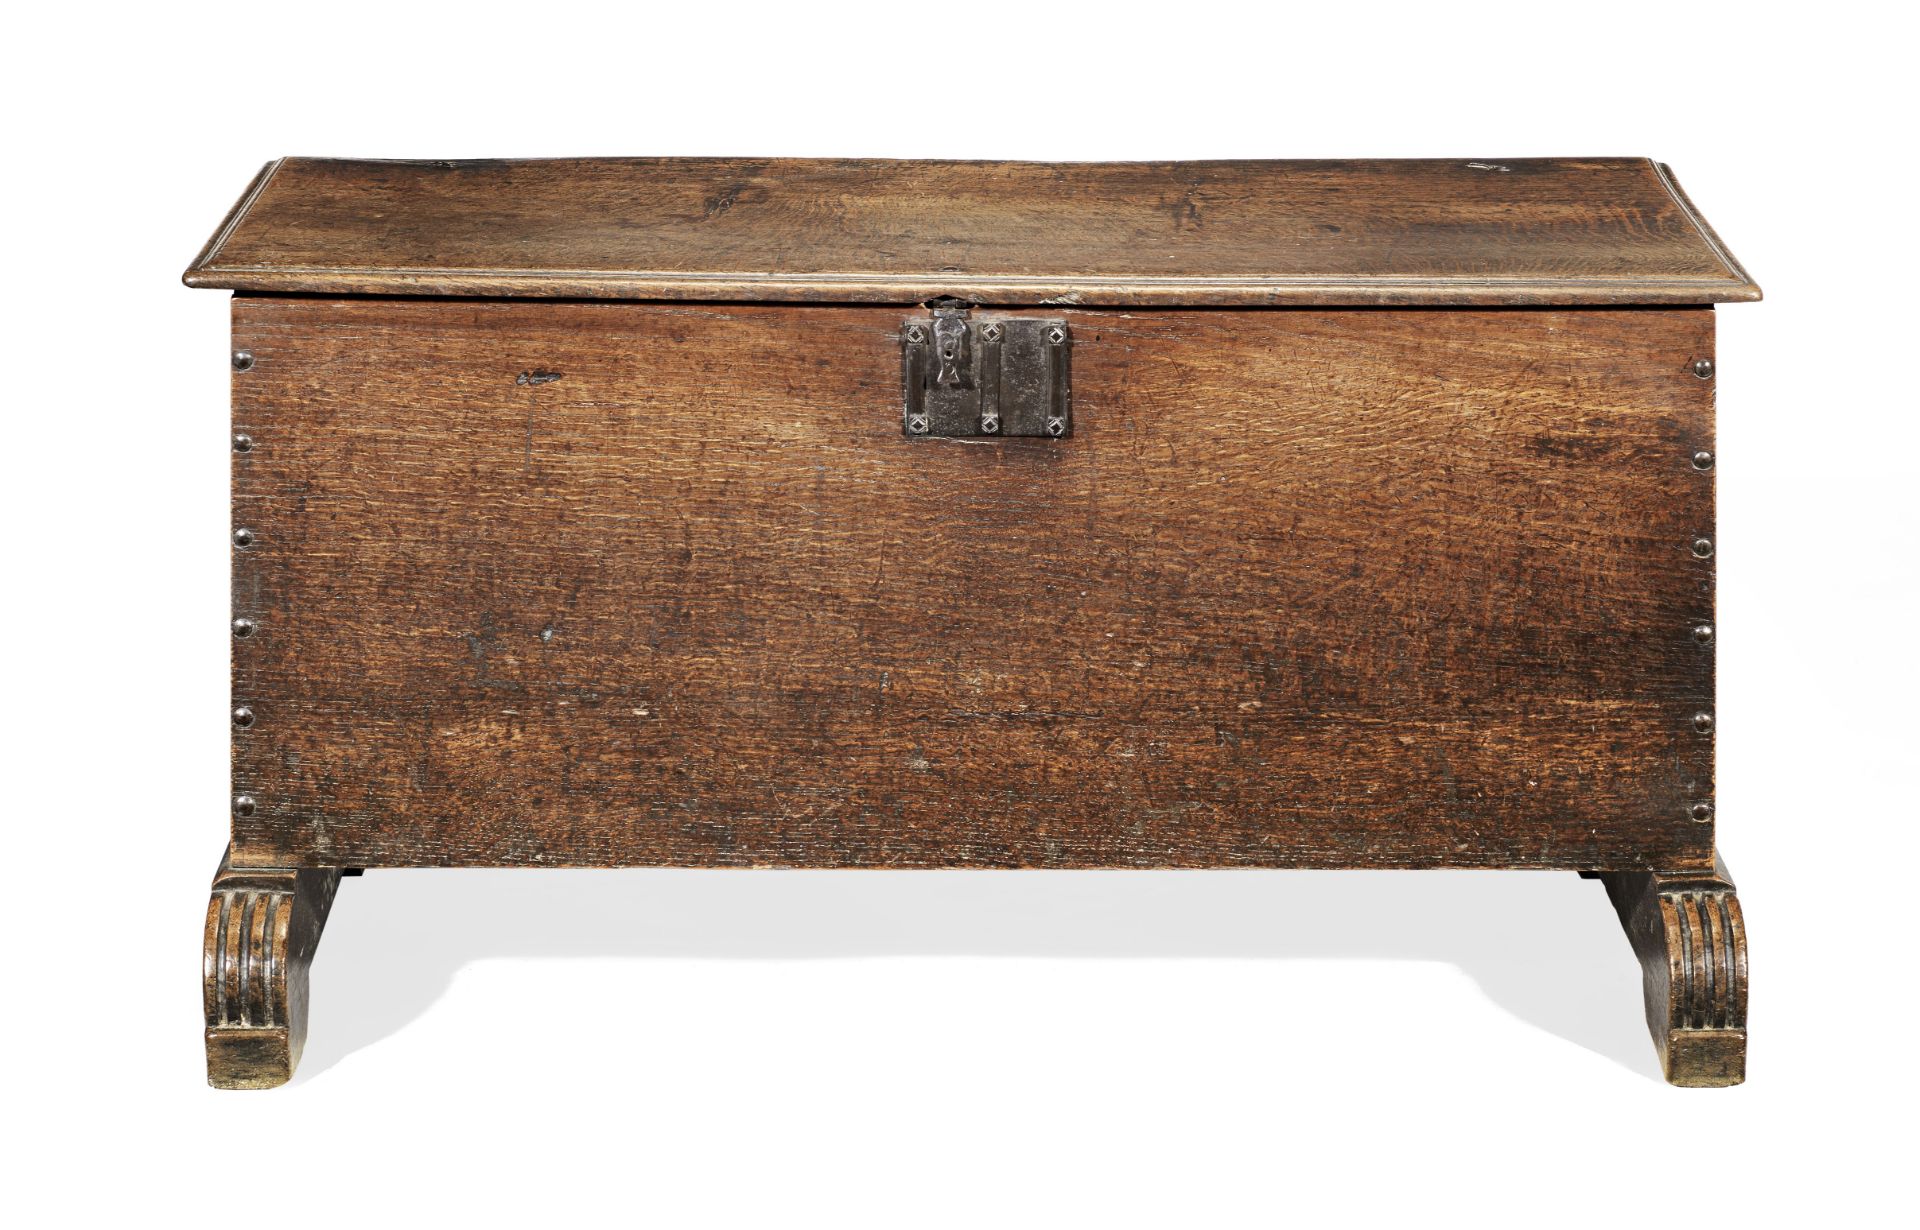 A 17th century boarded oak chest